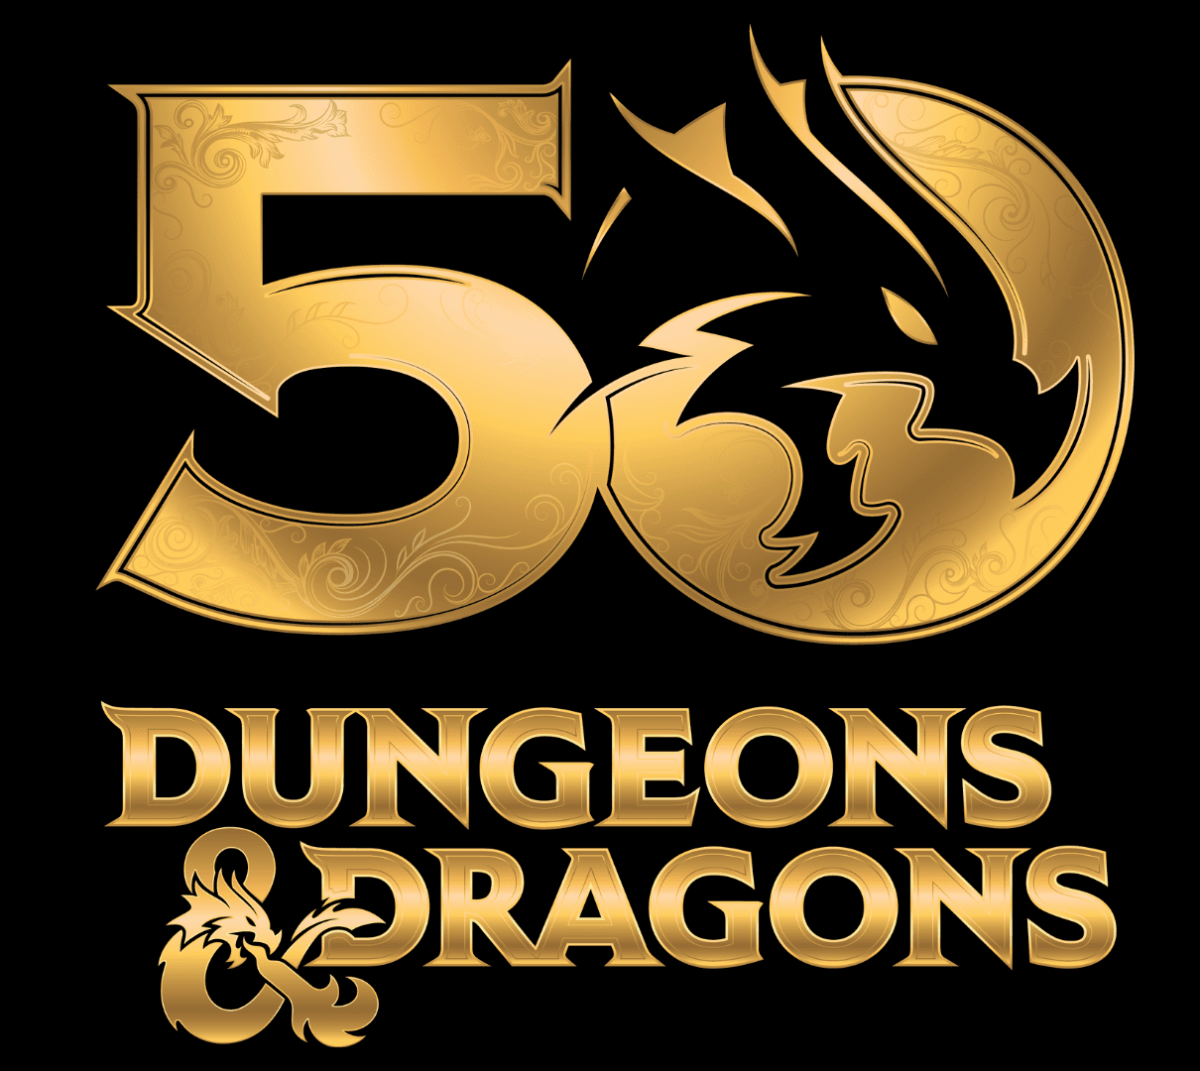 Dungeons and Dragons Club Celebrates Game’s 50th Anniversary